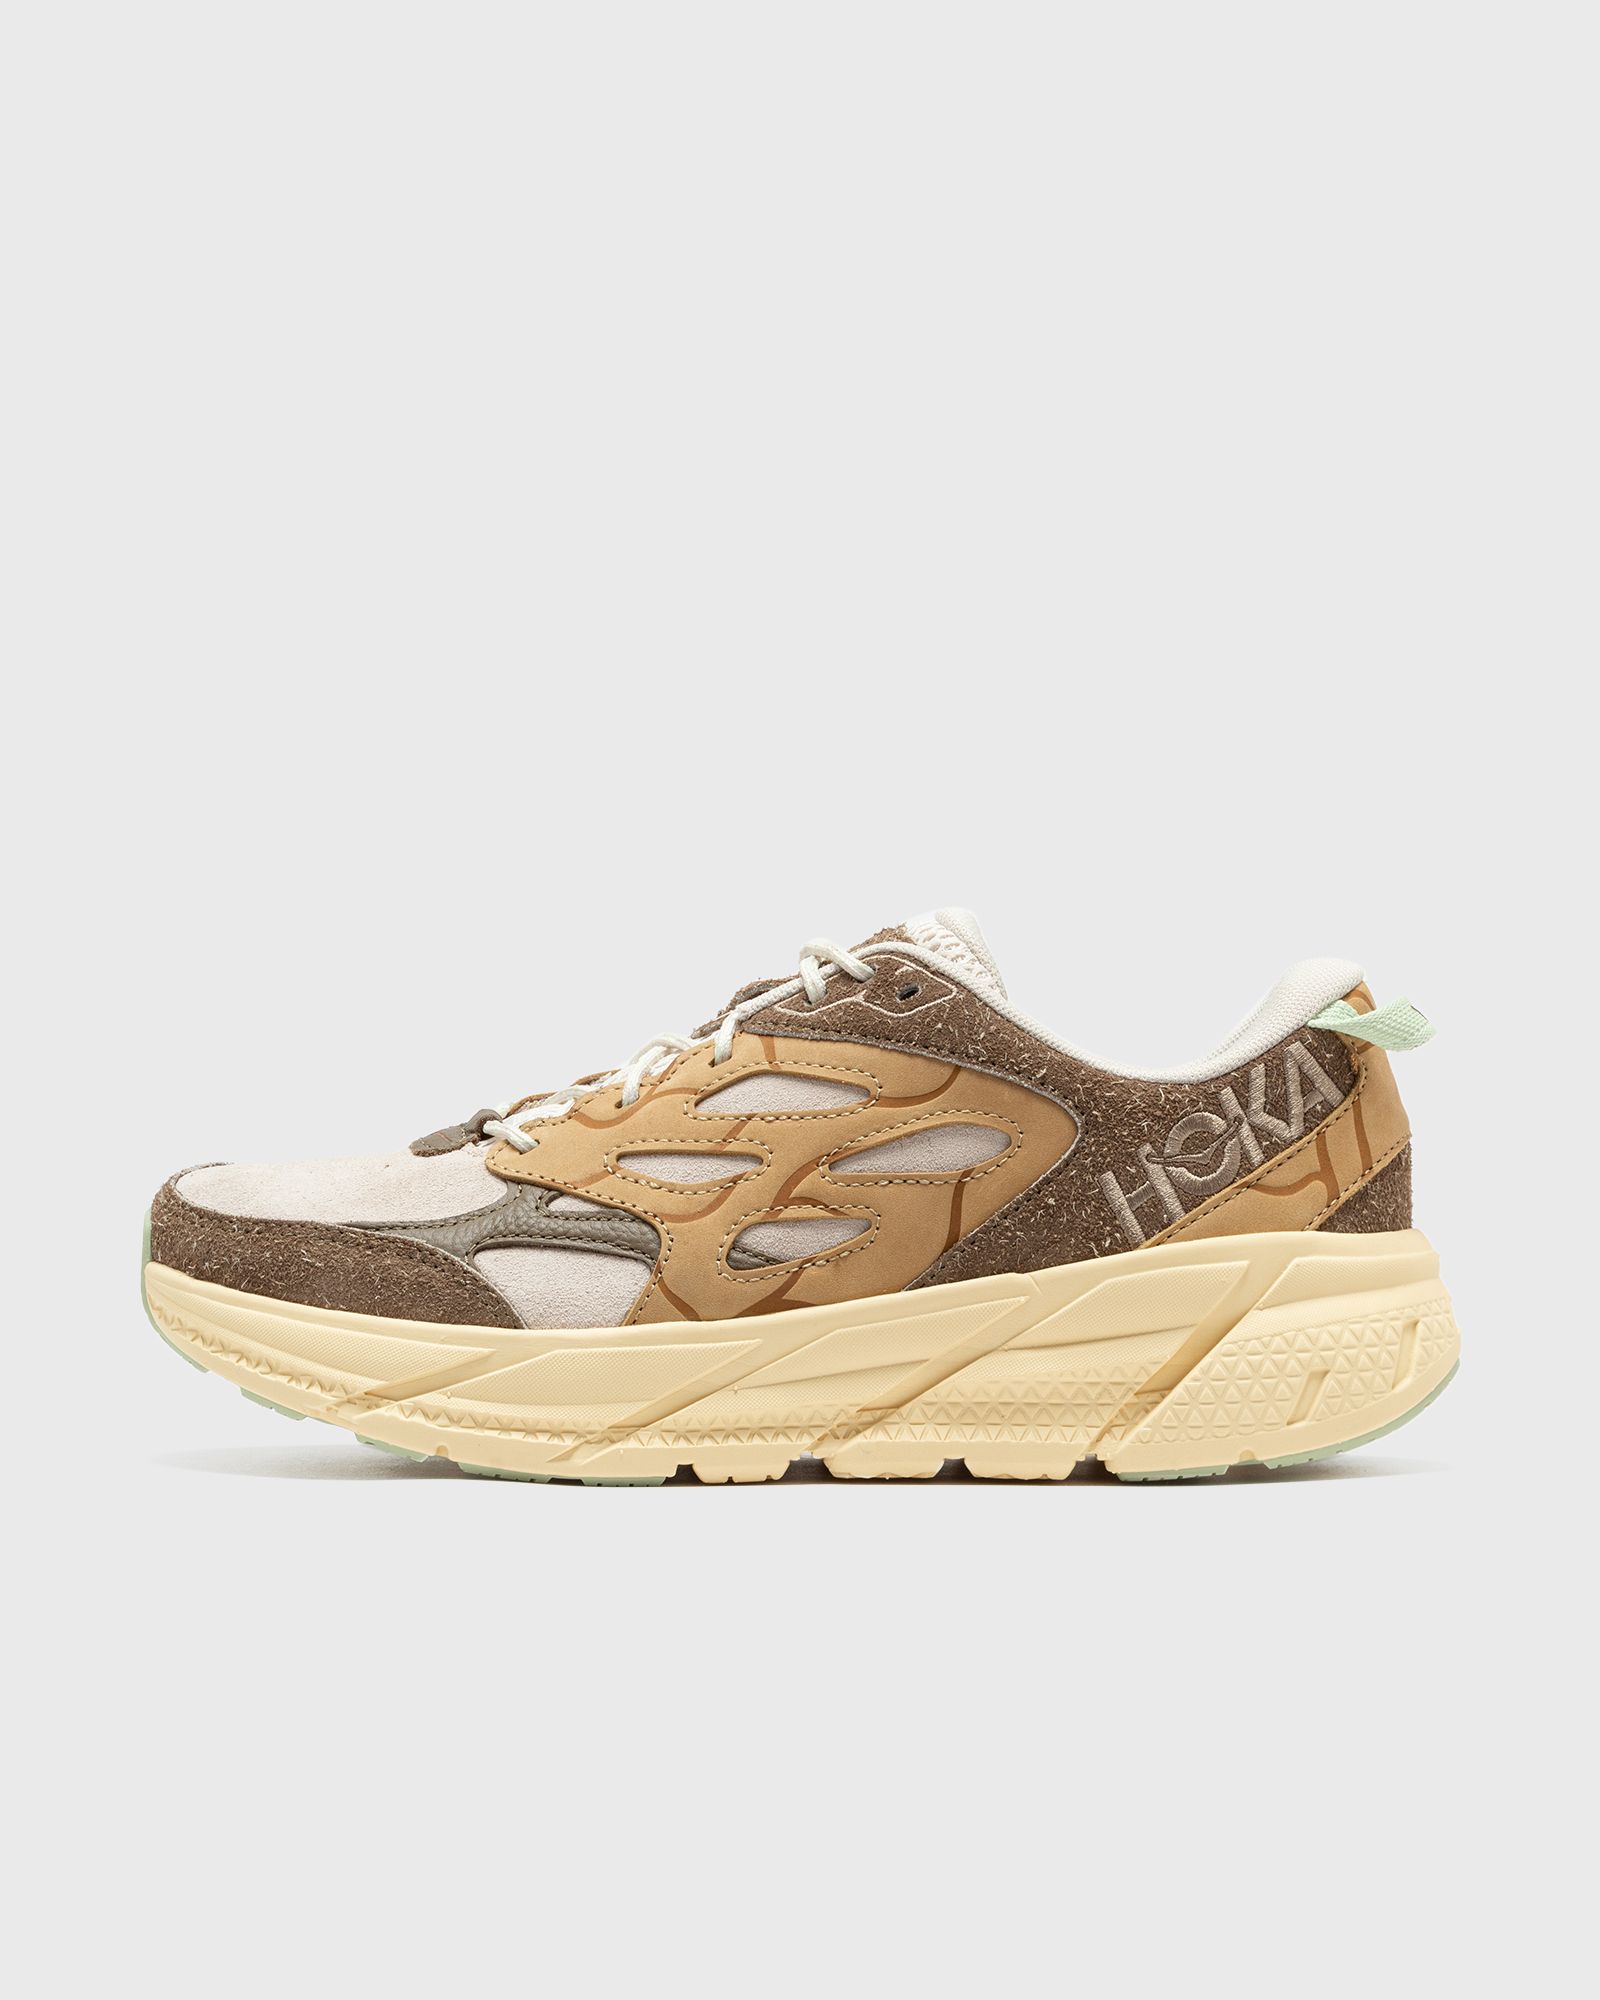 Hoka One One - clifton l suede tp men lowtop|performance & sports brown|beige in größe:44 2/3